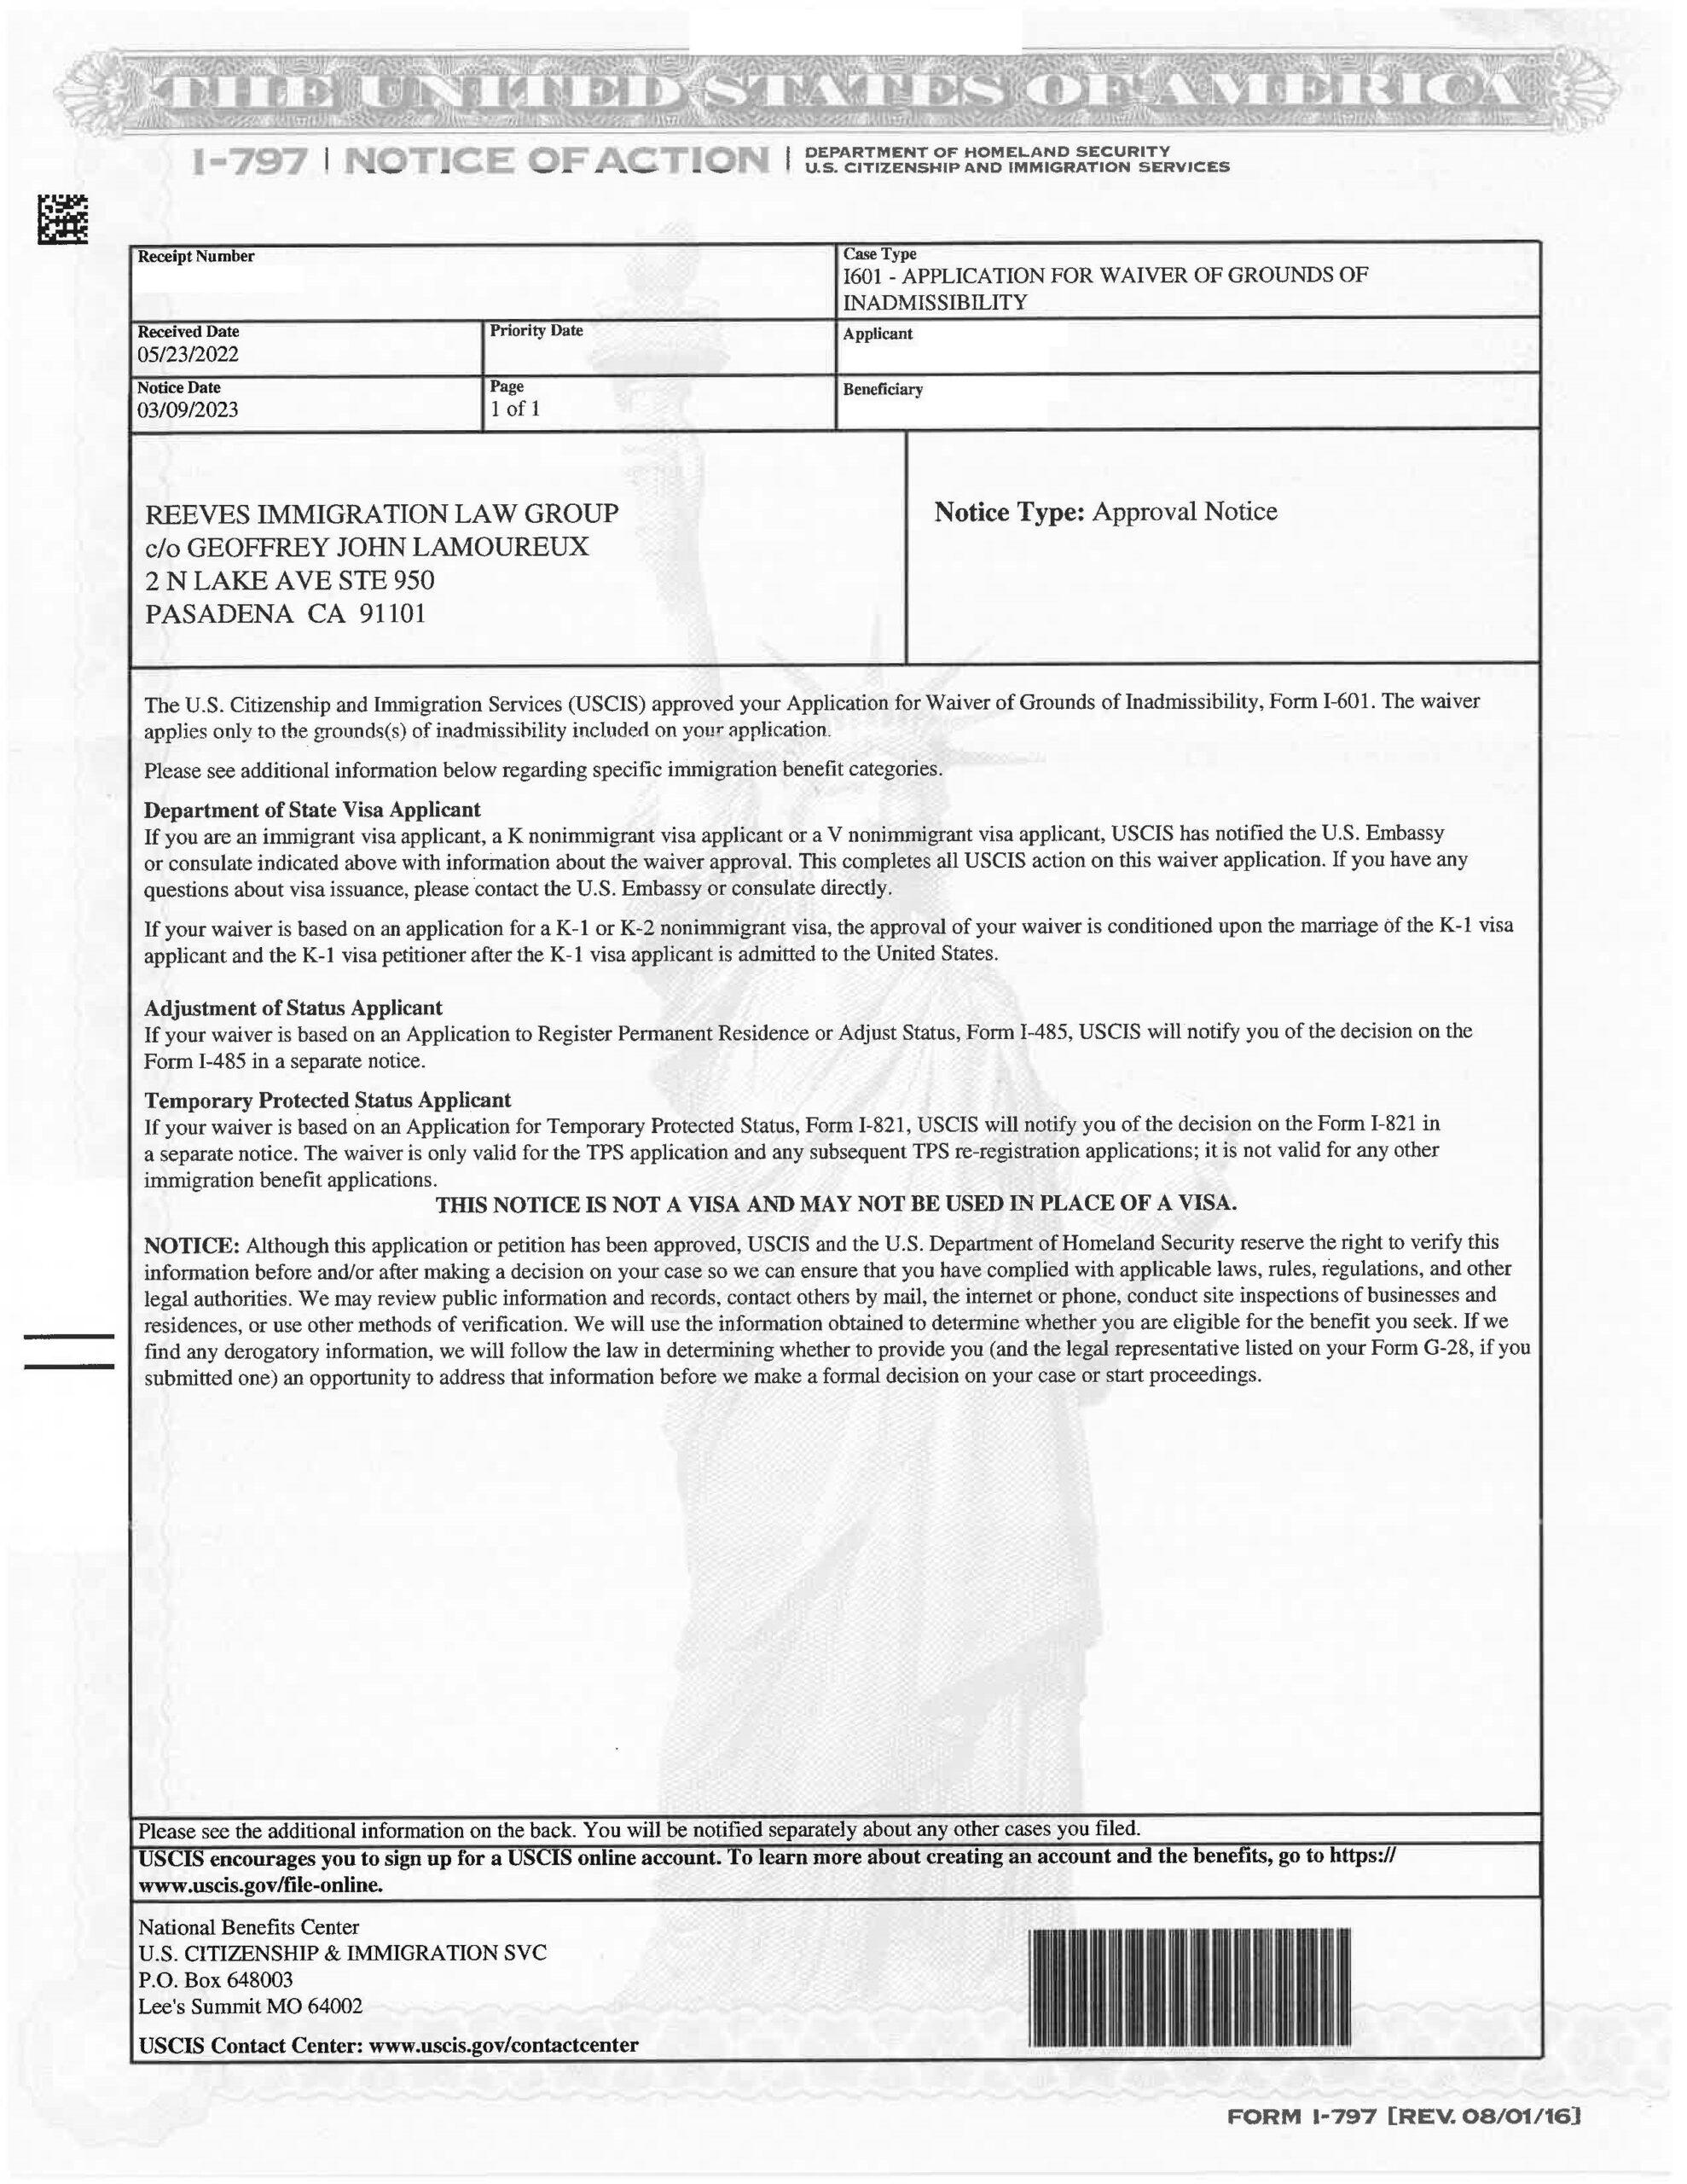 Forms I-601, I-601A - Applying For a Waiver of Inadmissibility